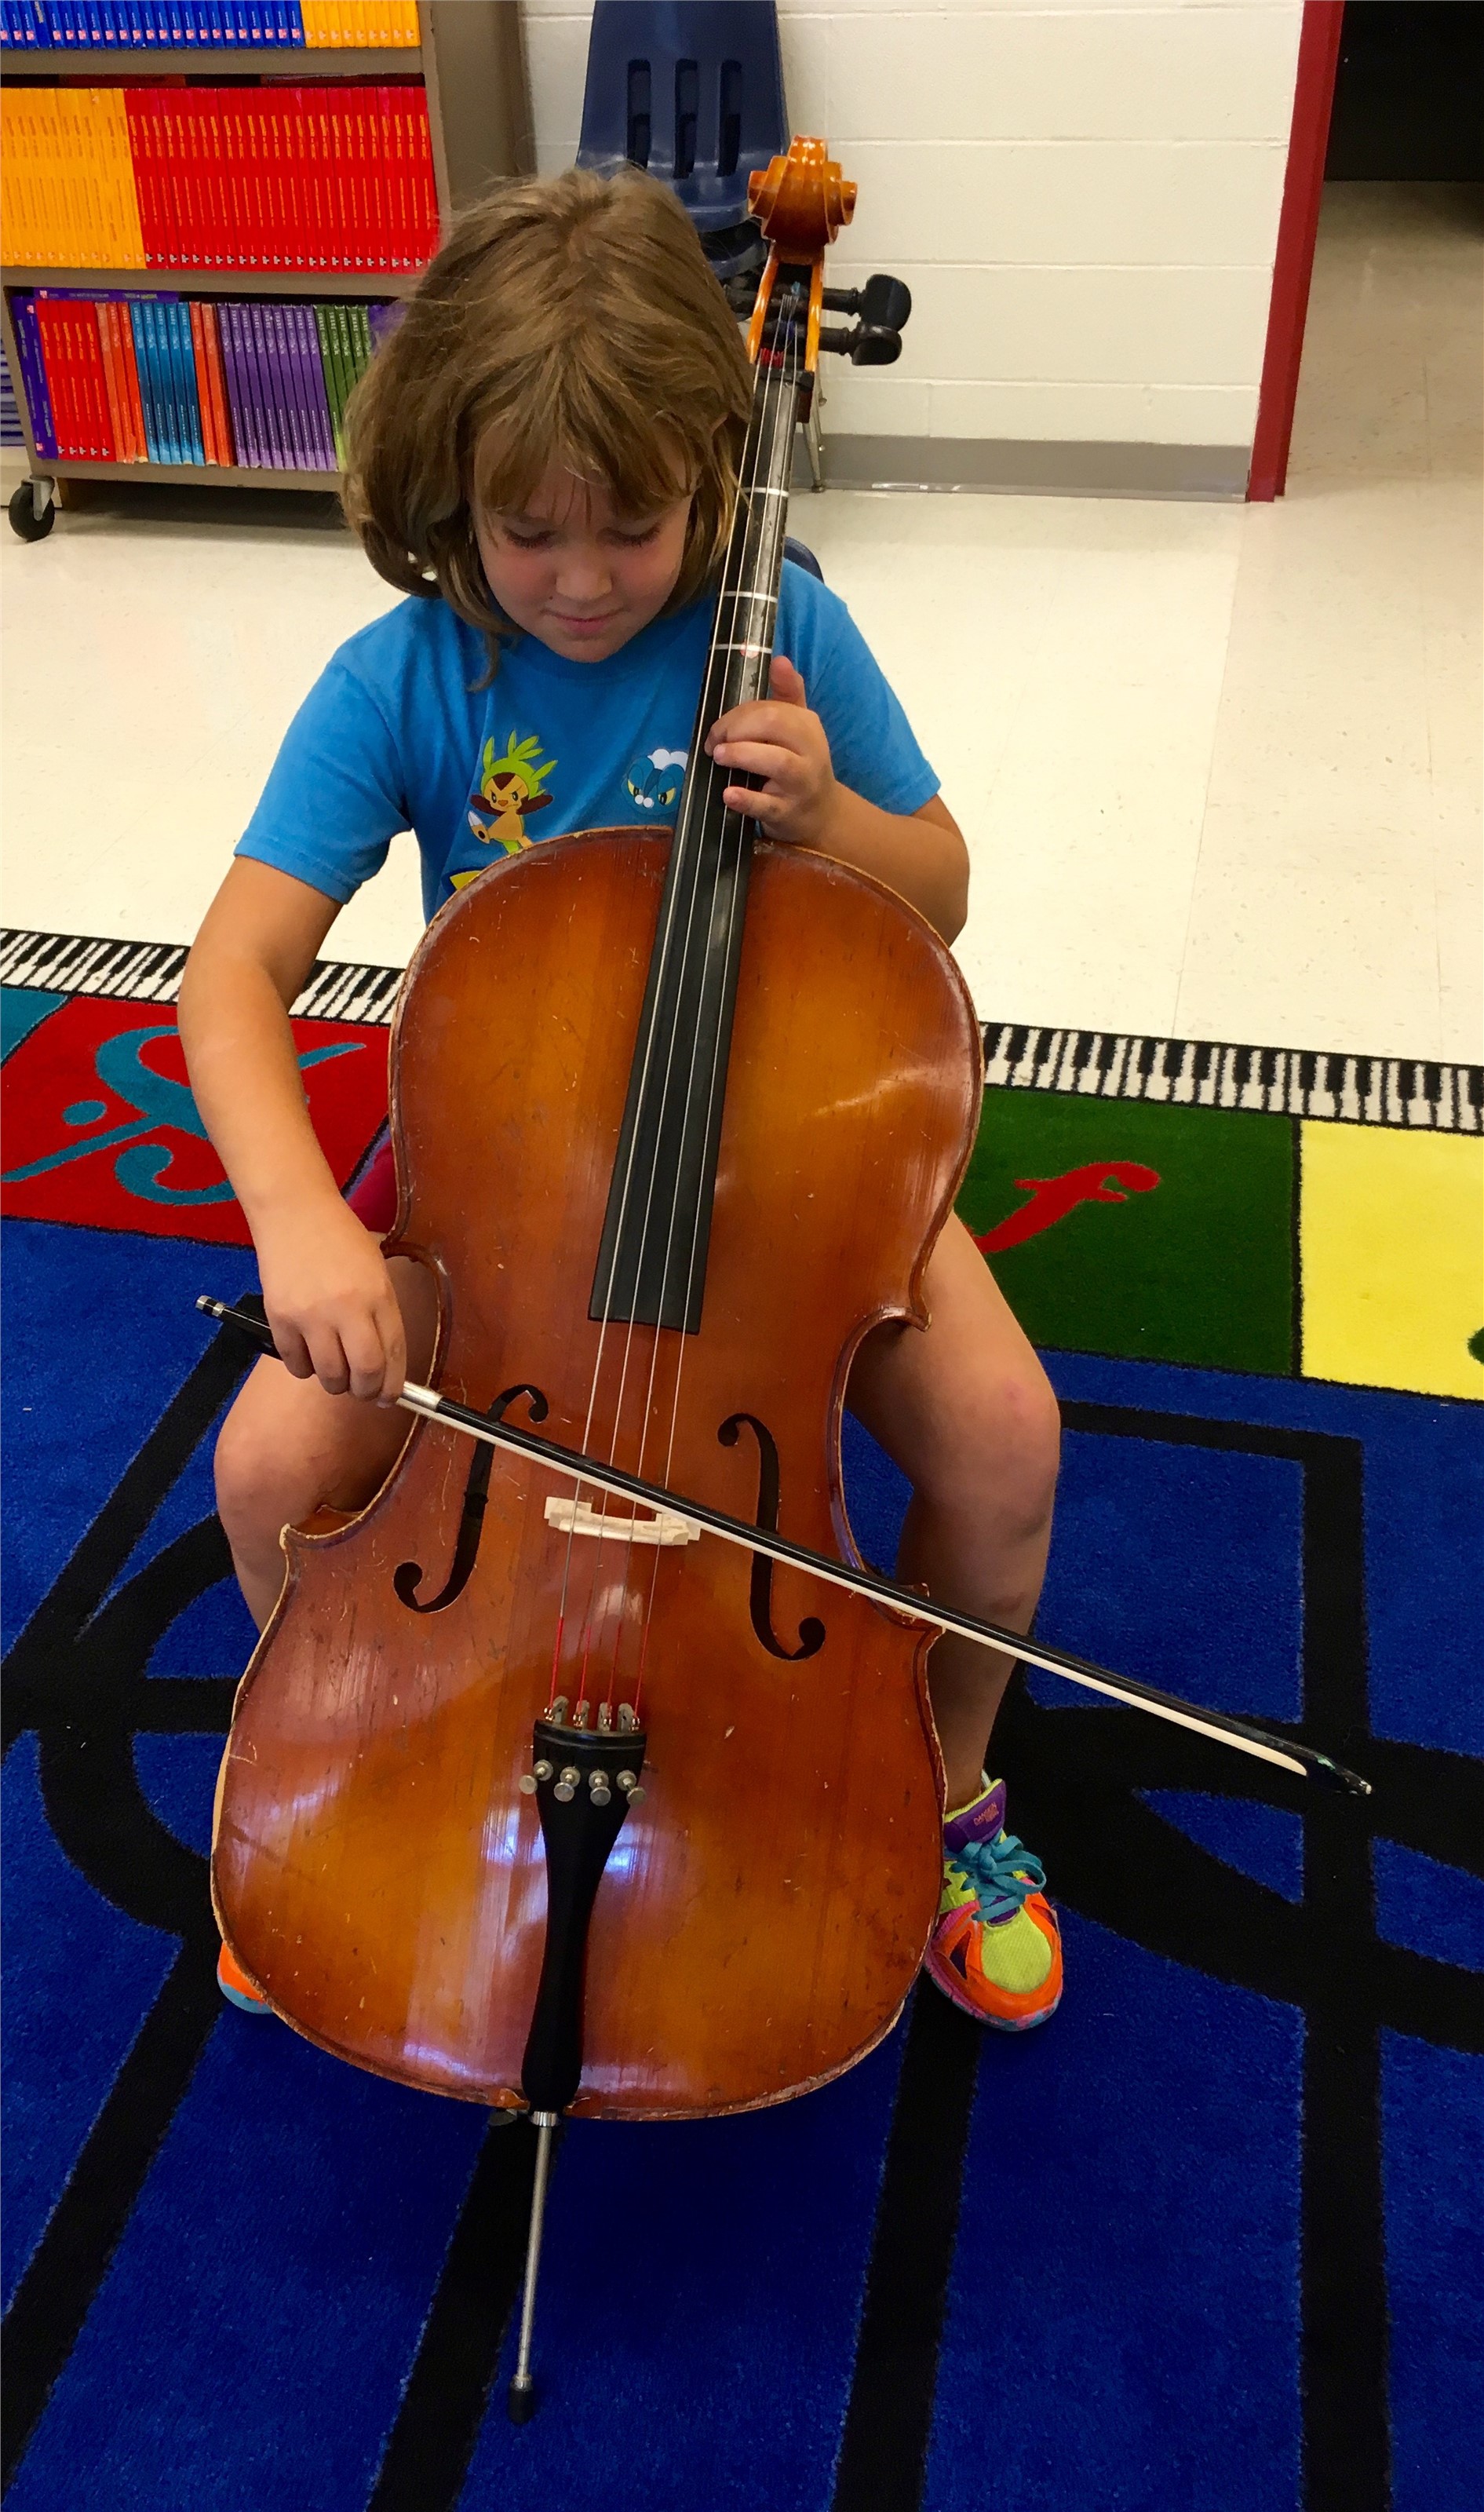 Trying out a cello.